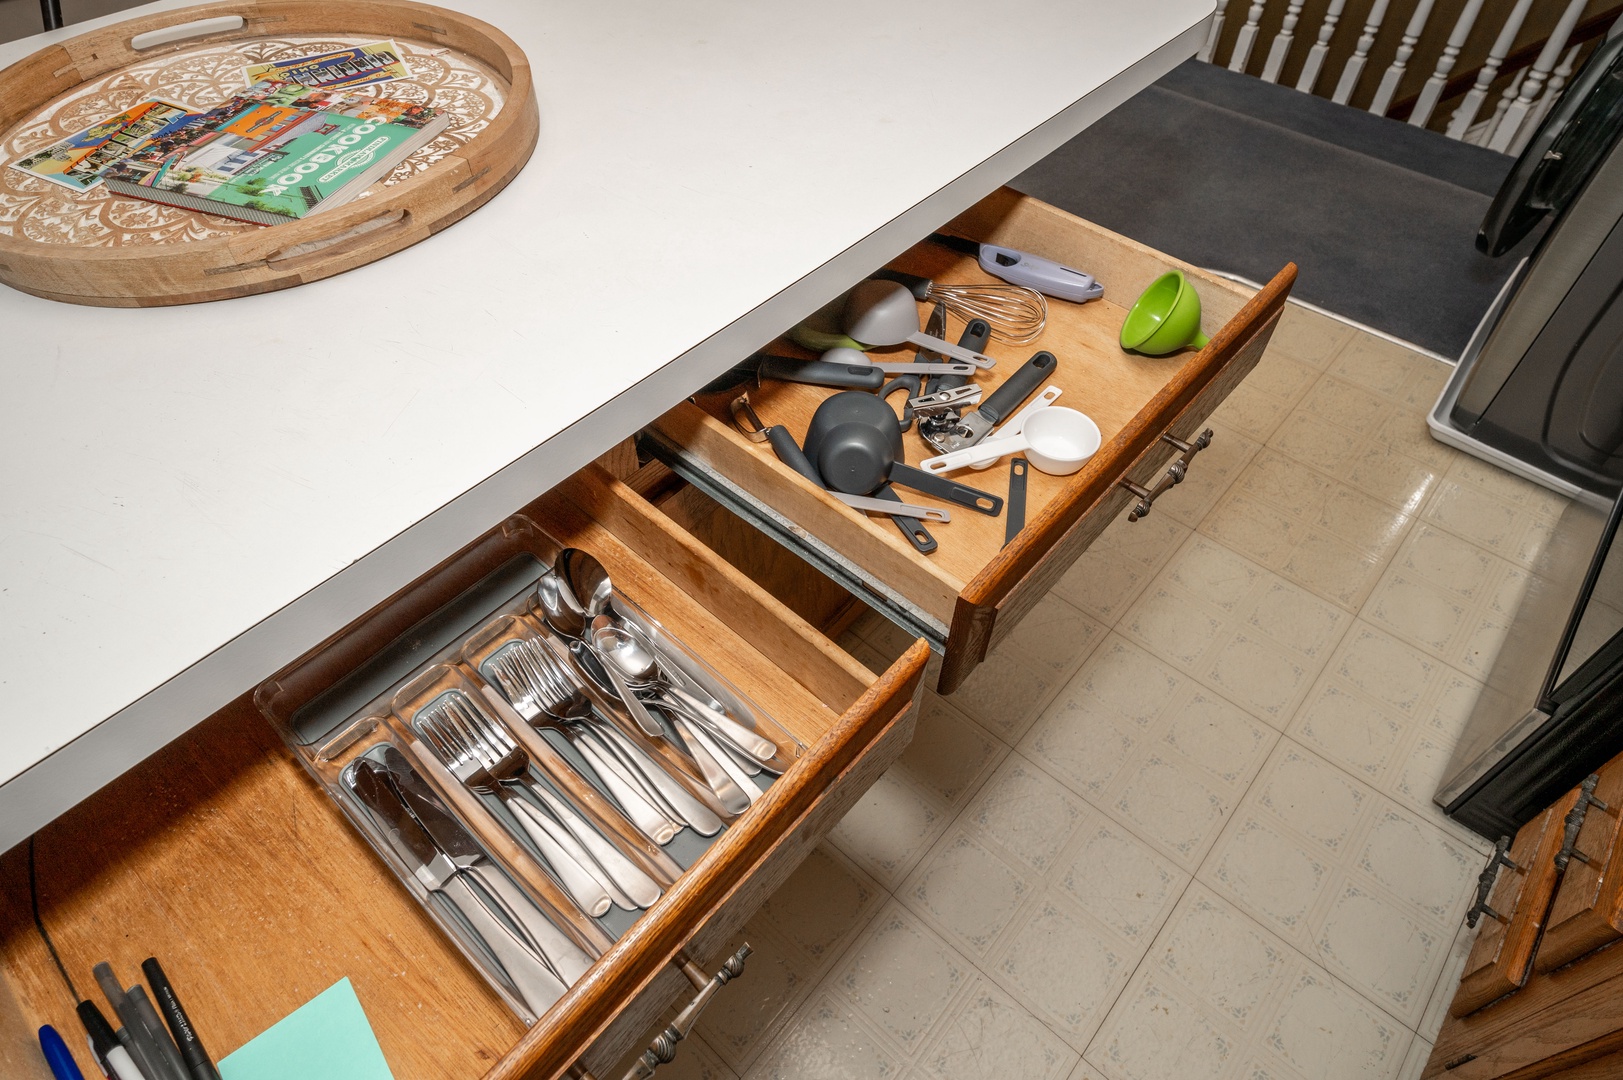 Utilize the provided kitchen utensils for your culinary needs